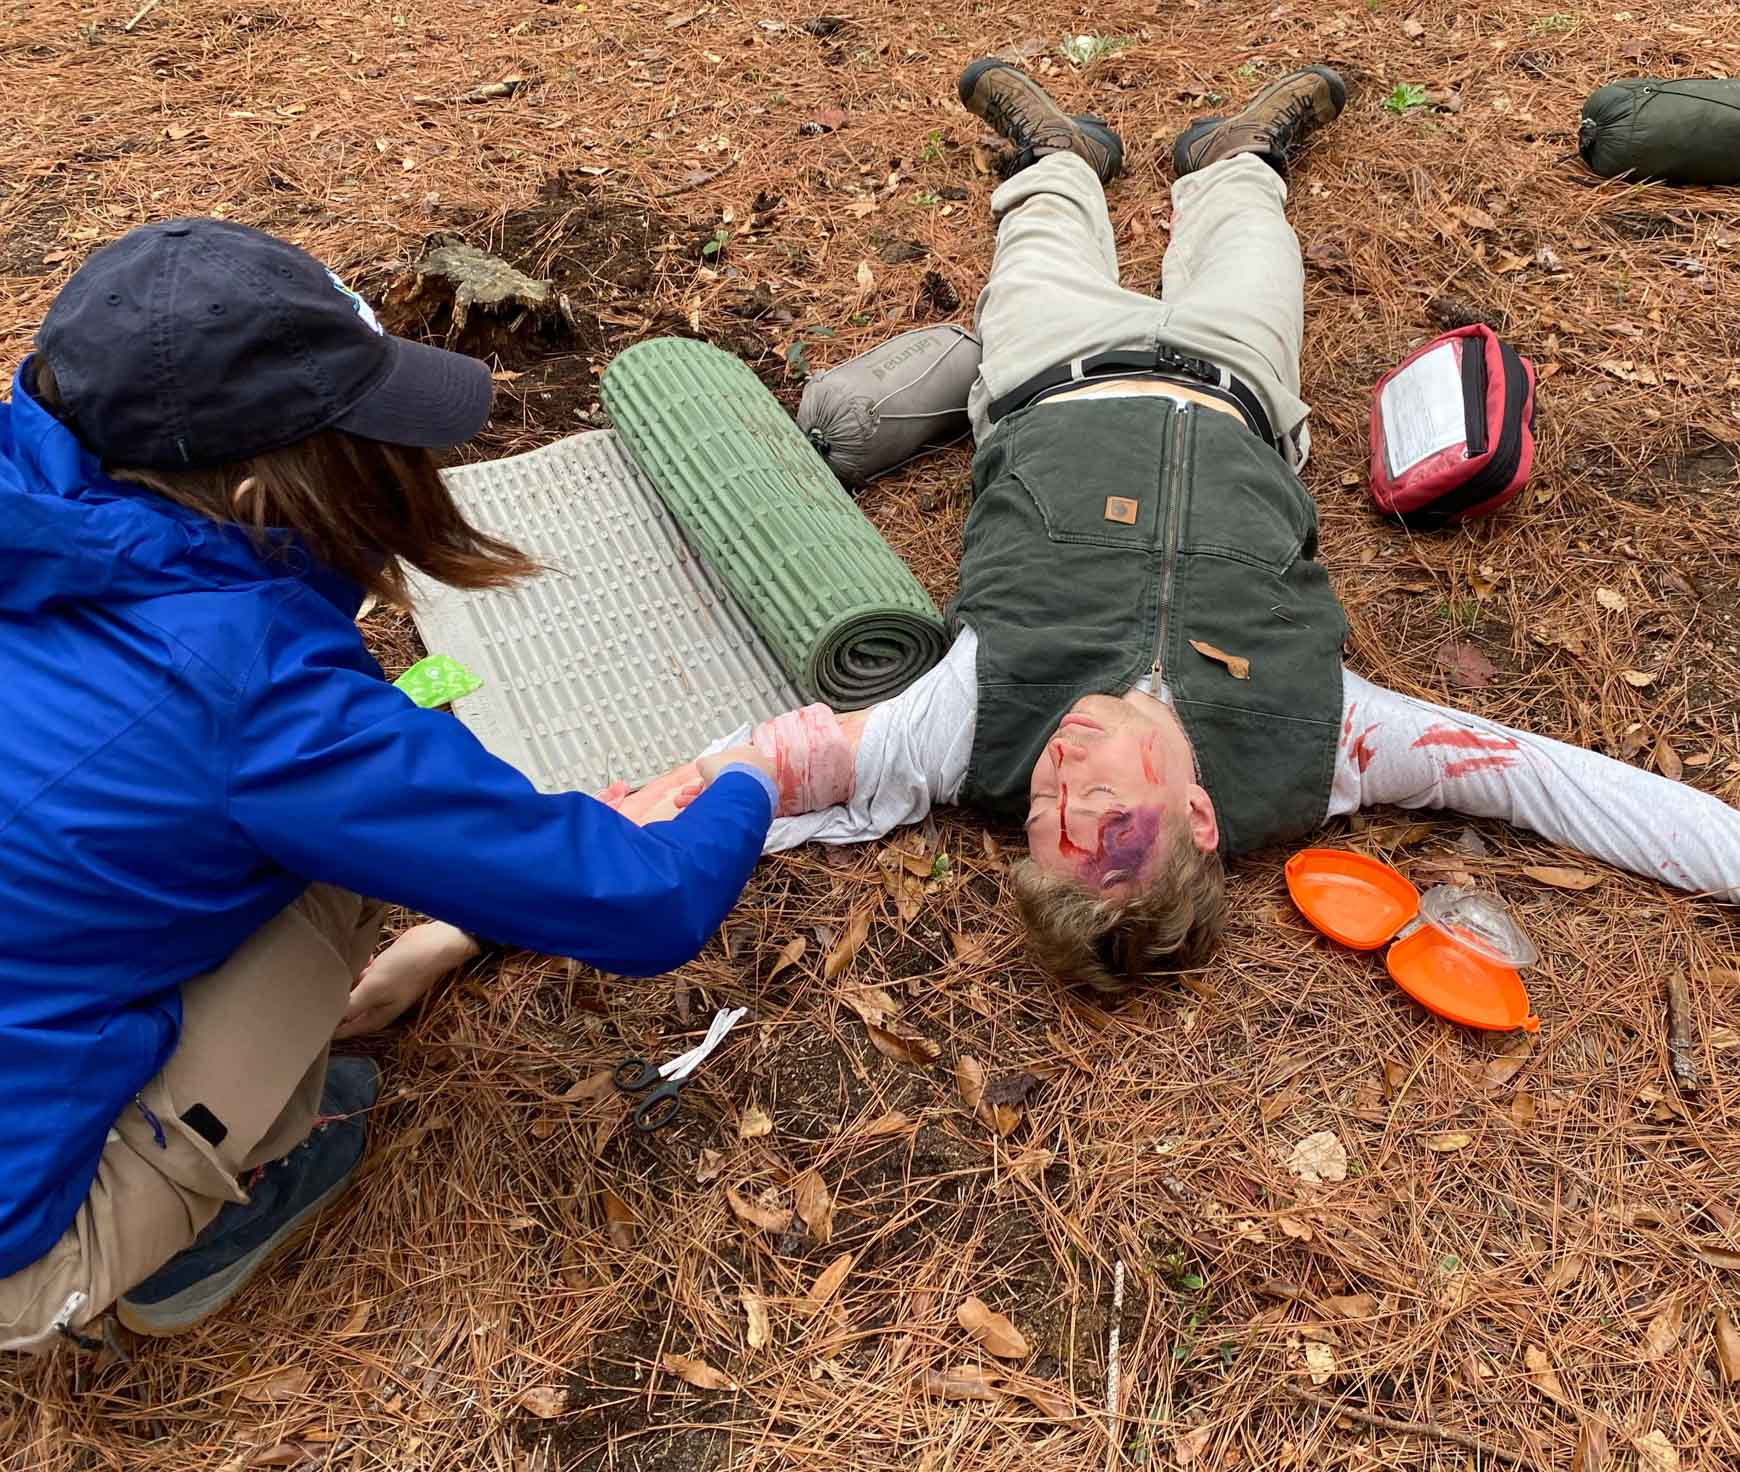 Two Wilderness EMT students practicing.